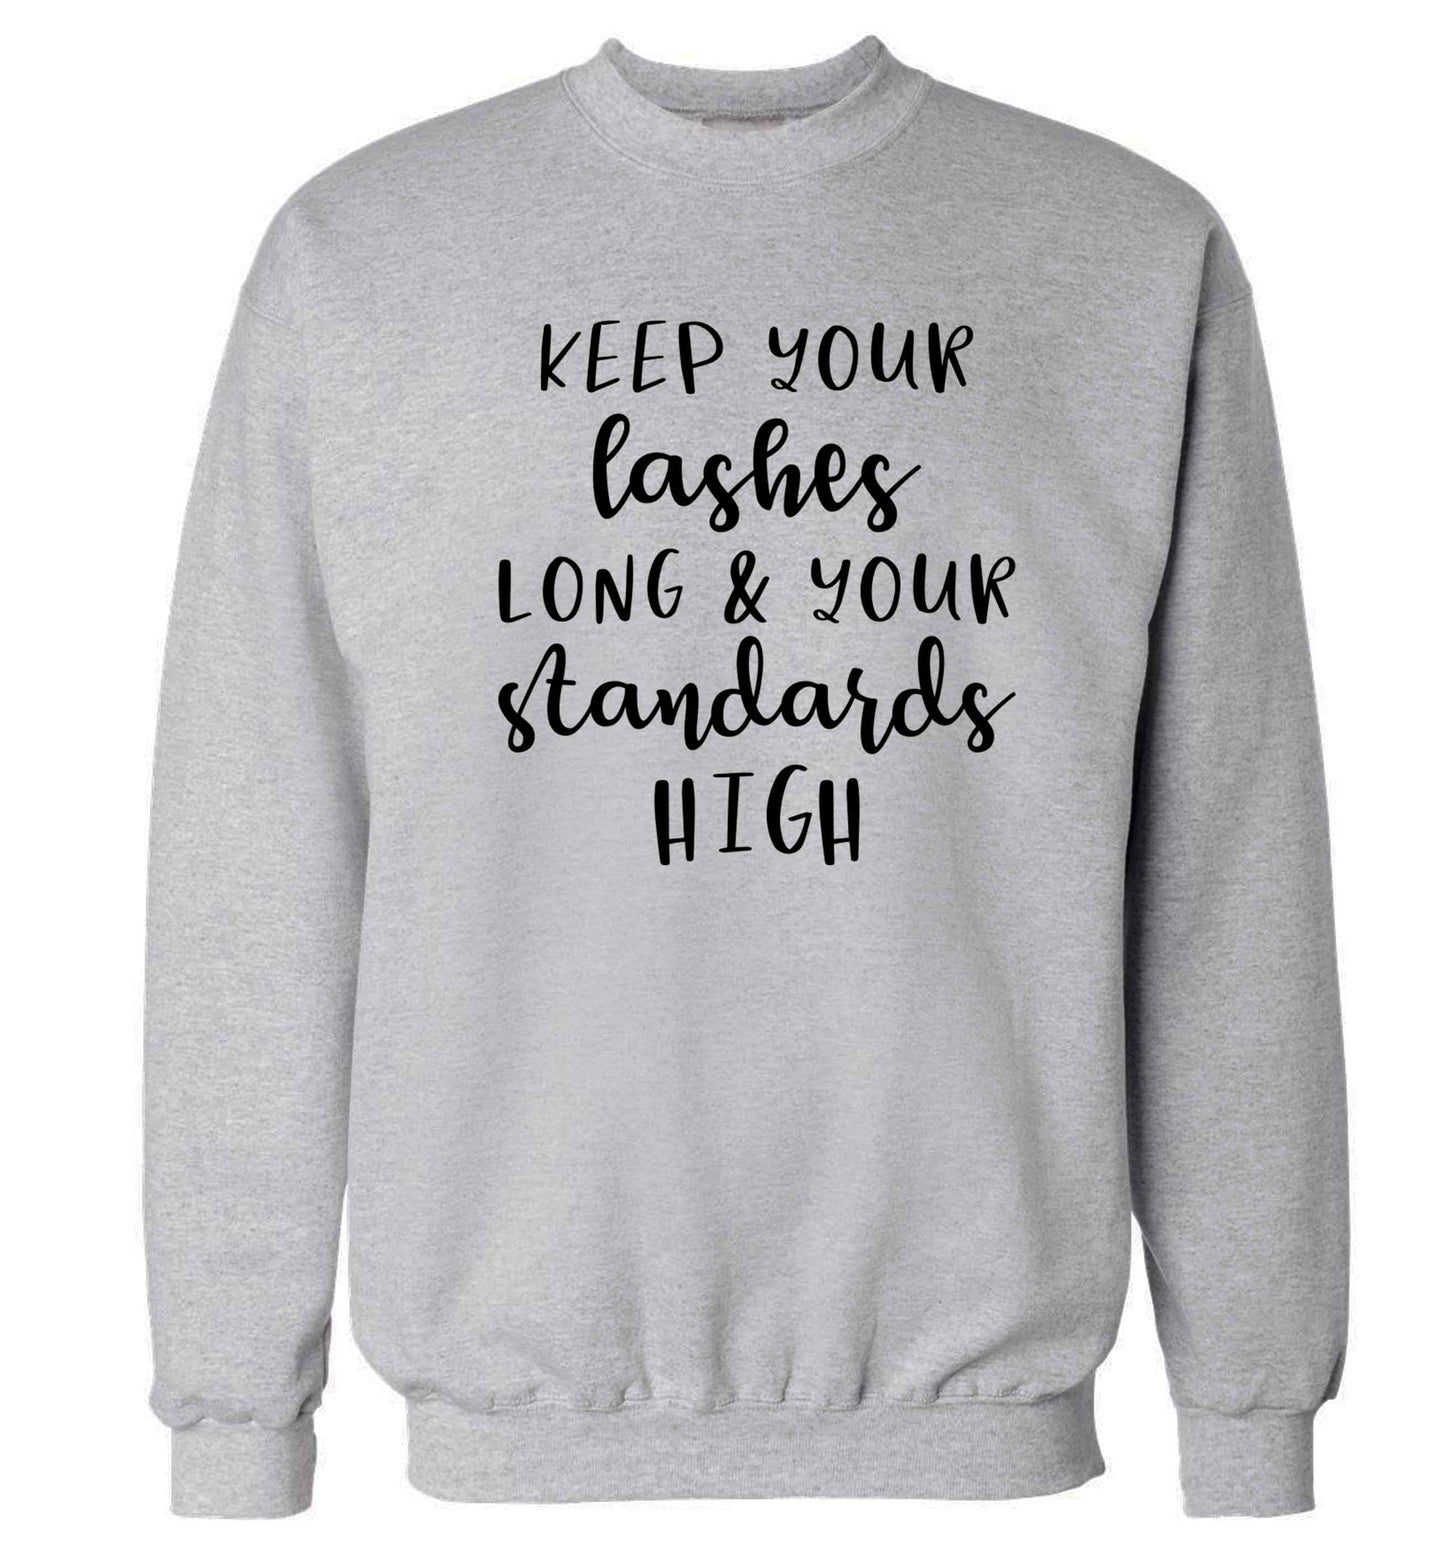 Keep your lashes long and your standards high Adult's unisex grey Sweater 2XL